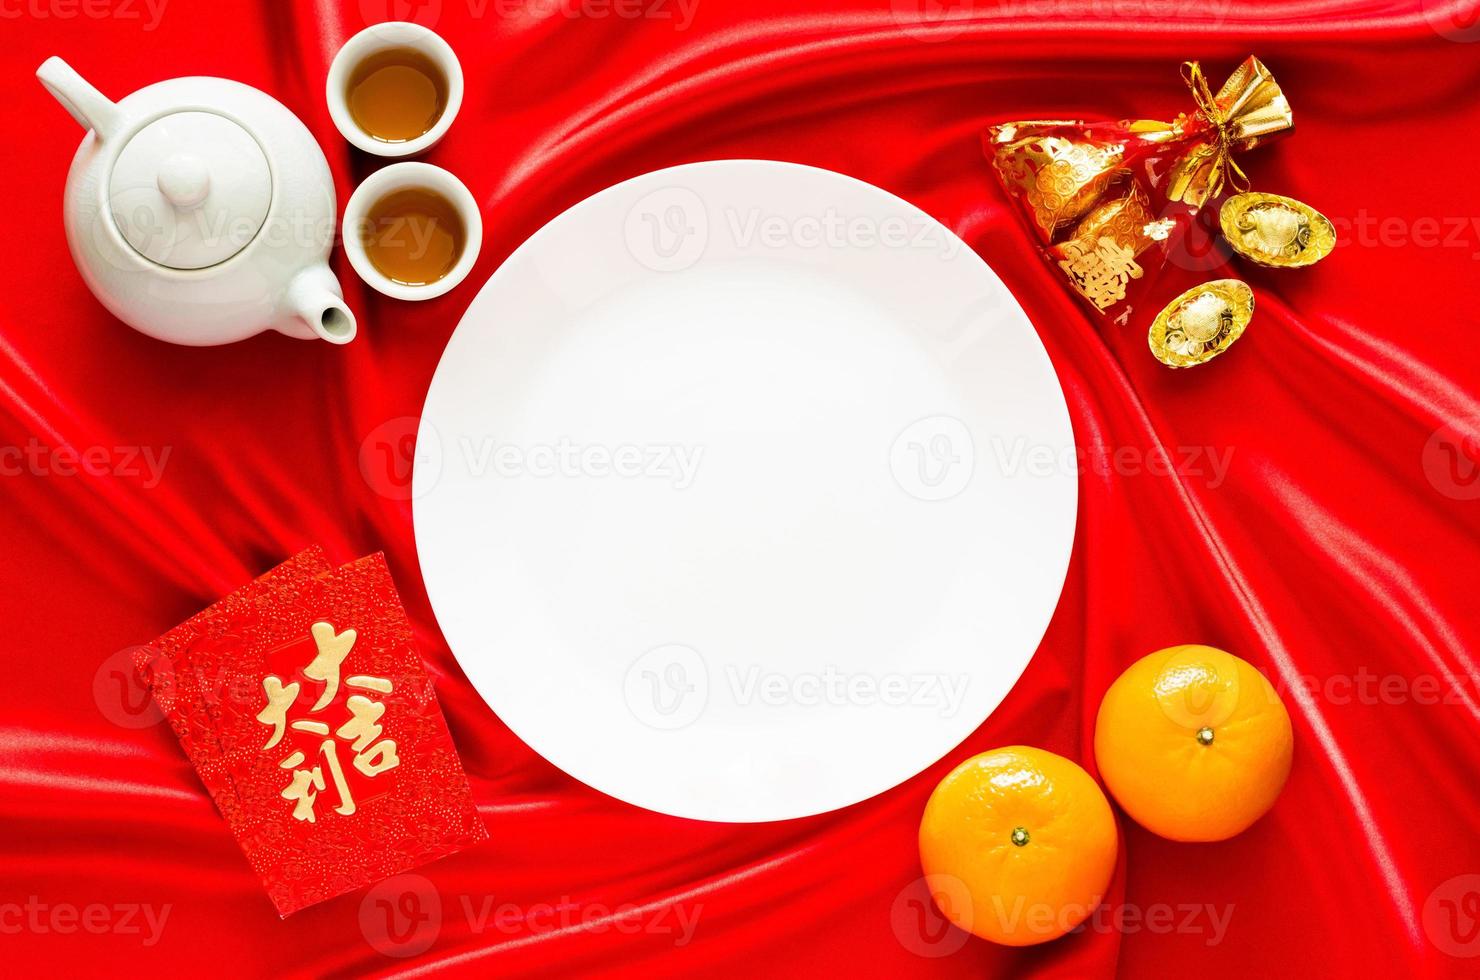 White plate on red satin cloth background with tea set, ingots, red bag word means wealth, oranges and red envelope packets or ang bao word means auspice for Chinese new year concept. photo